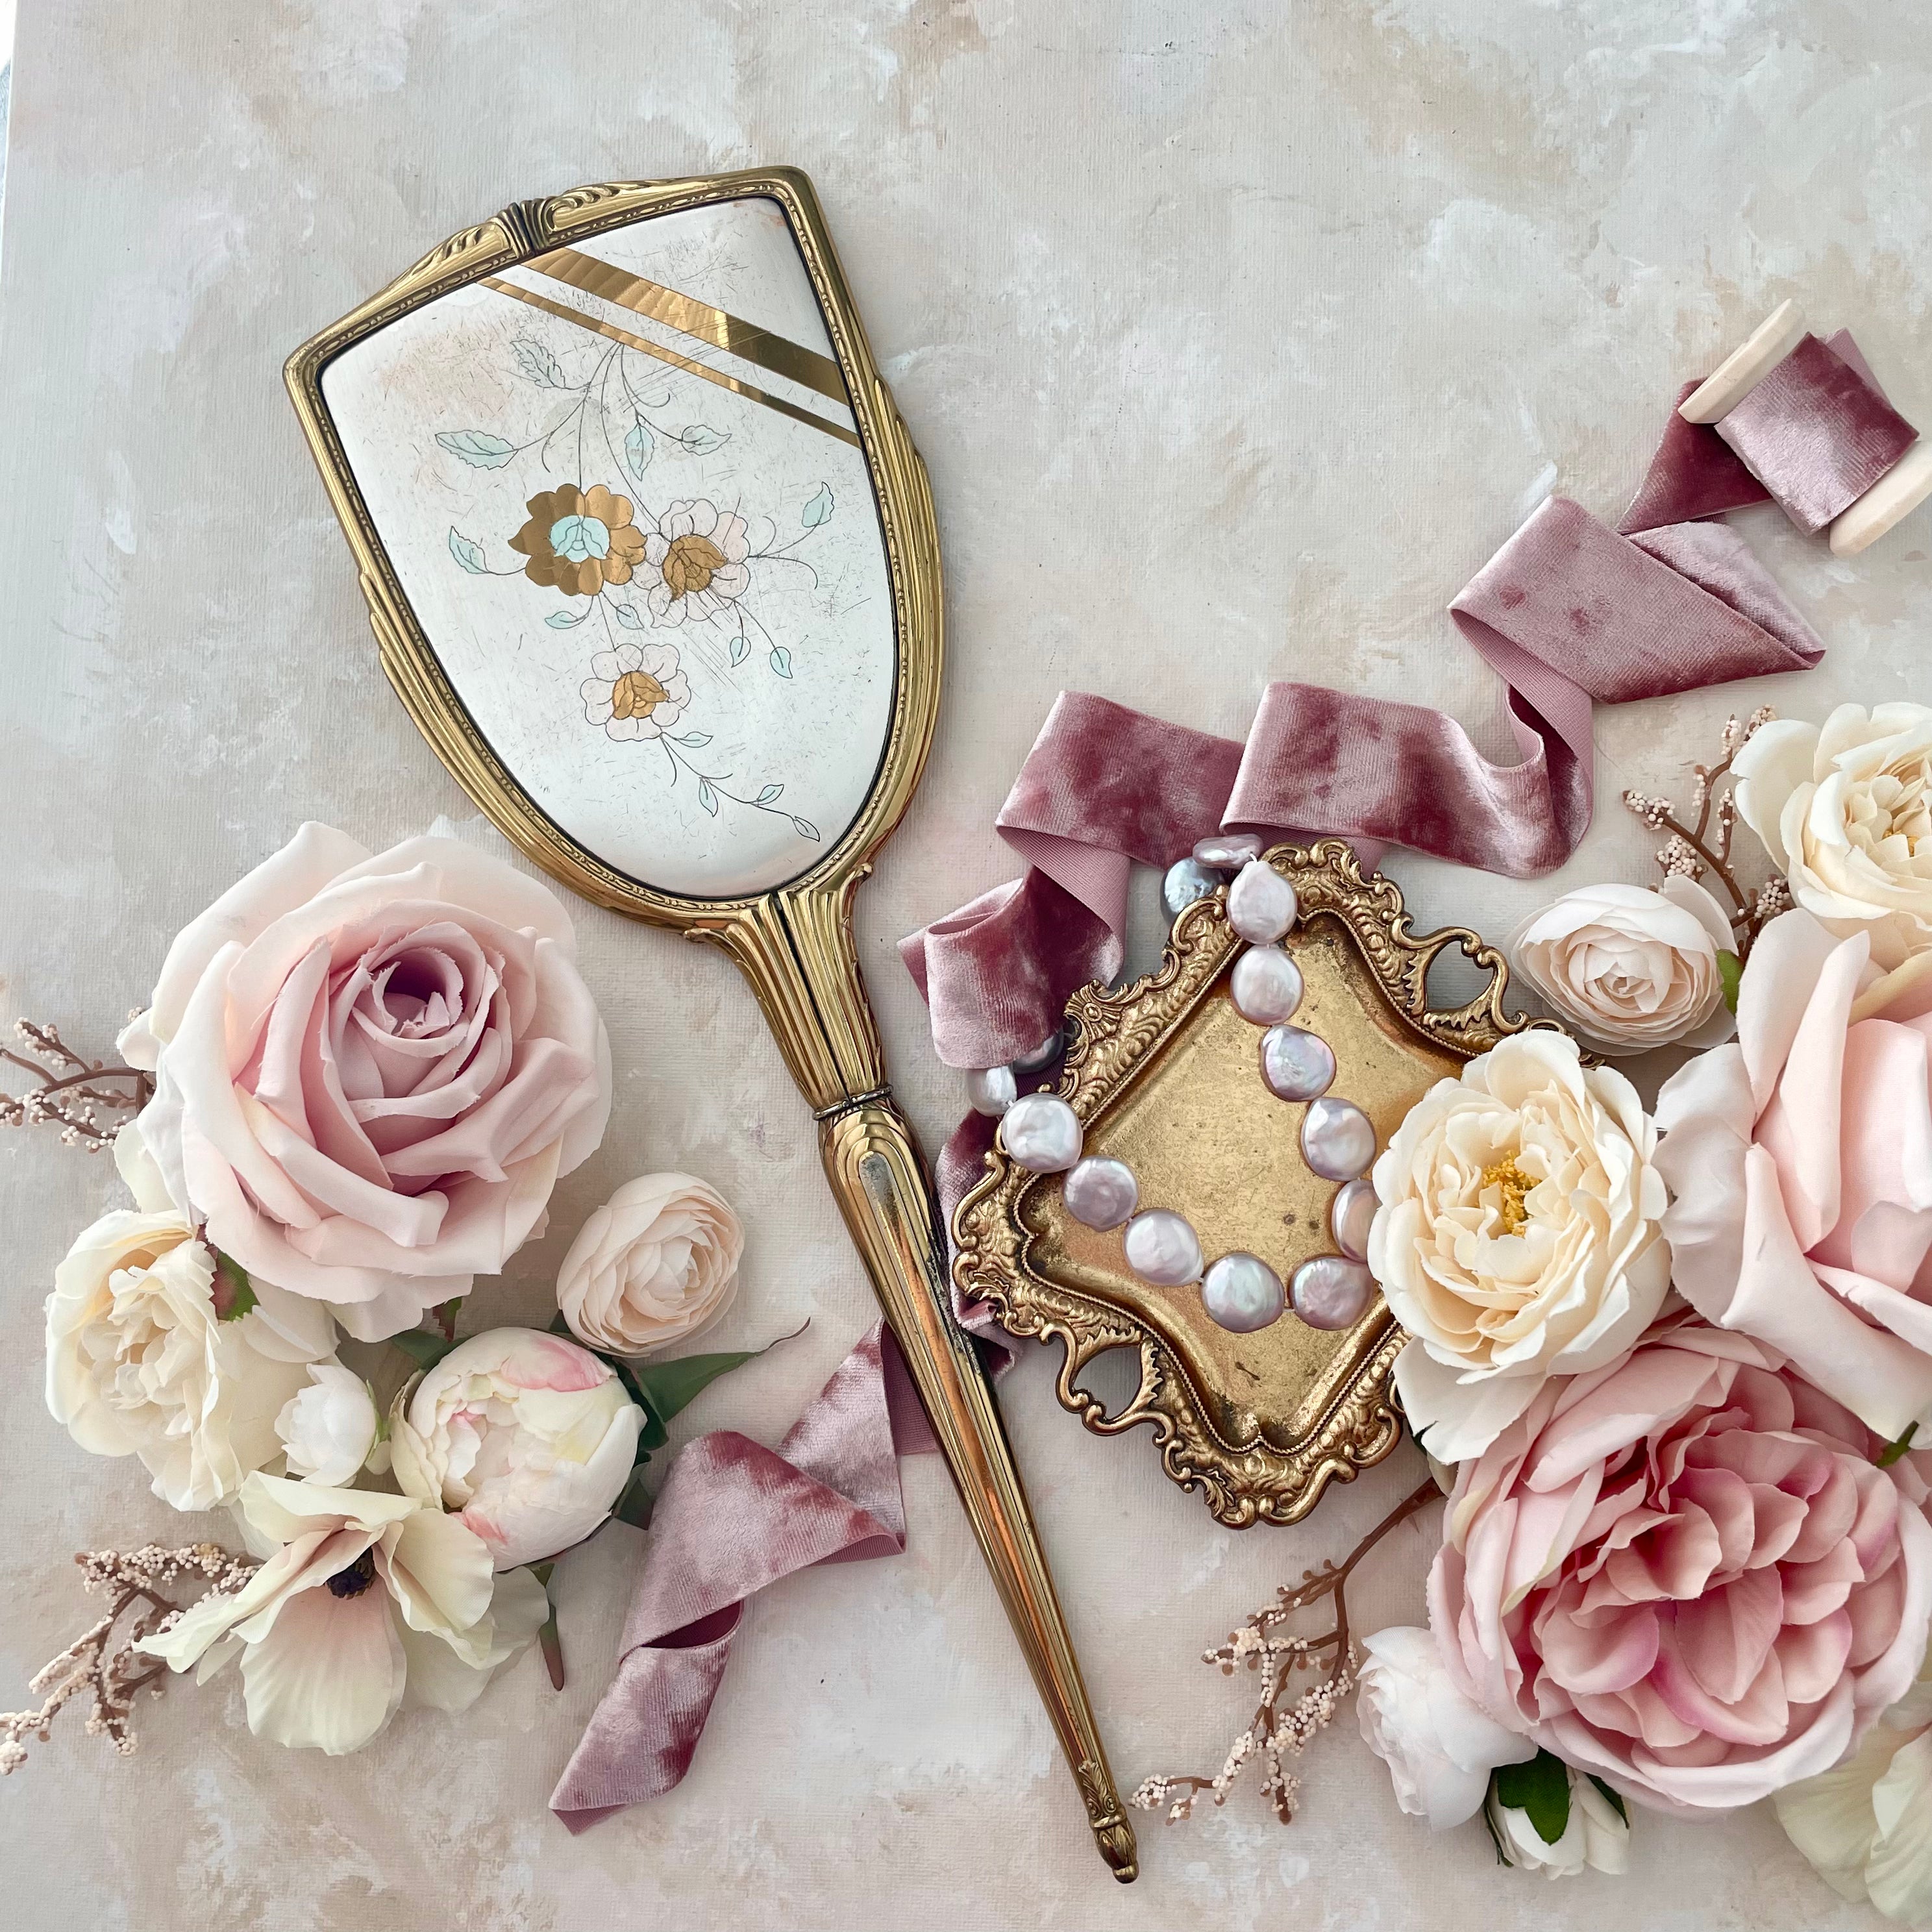 Gold vintage tray for wedding flay lay styled with dusty mauve ribbon, pink and white florals and vintage mirror - Flat Lay Props from Champagne & GRIT